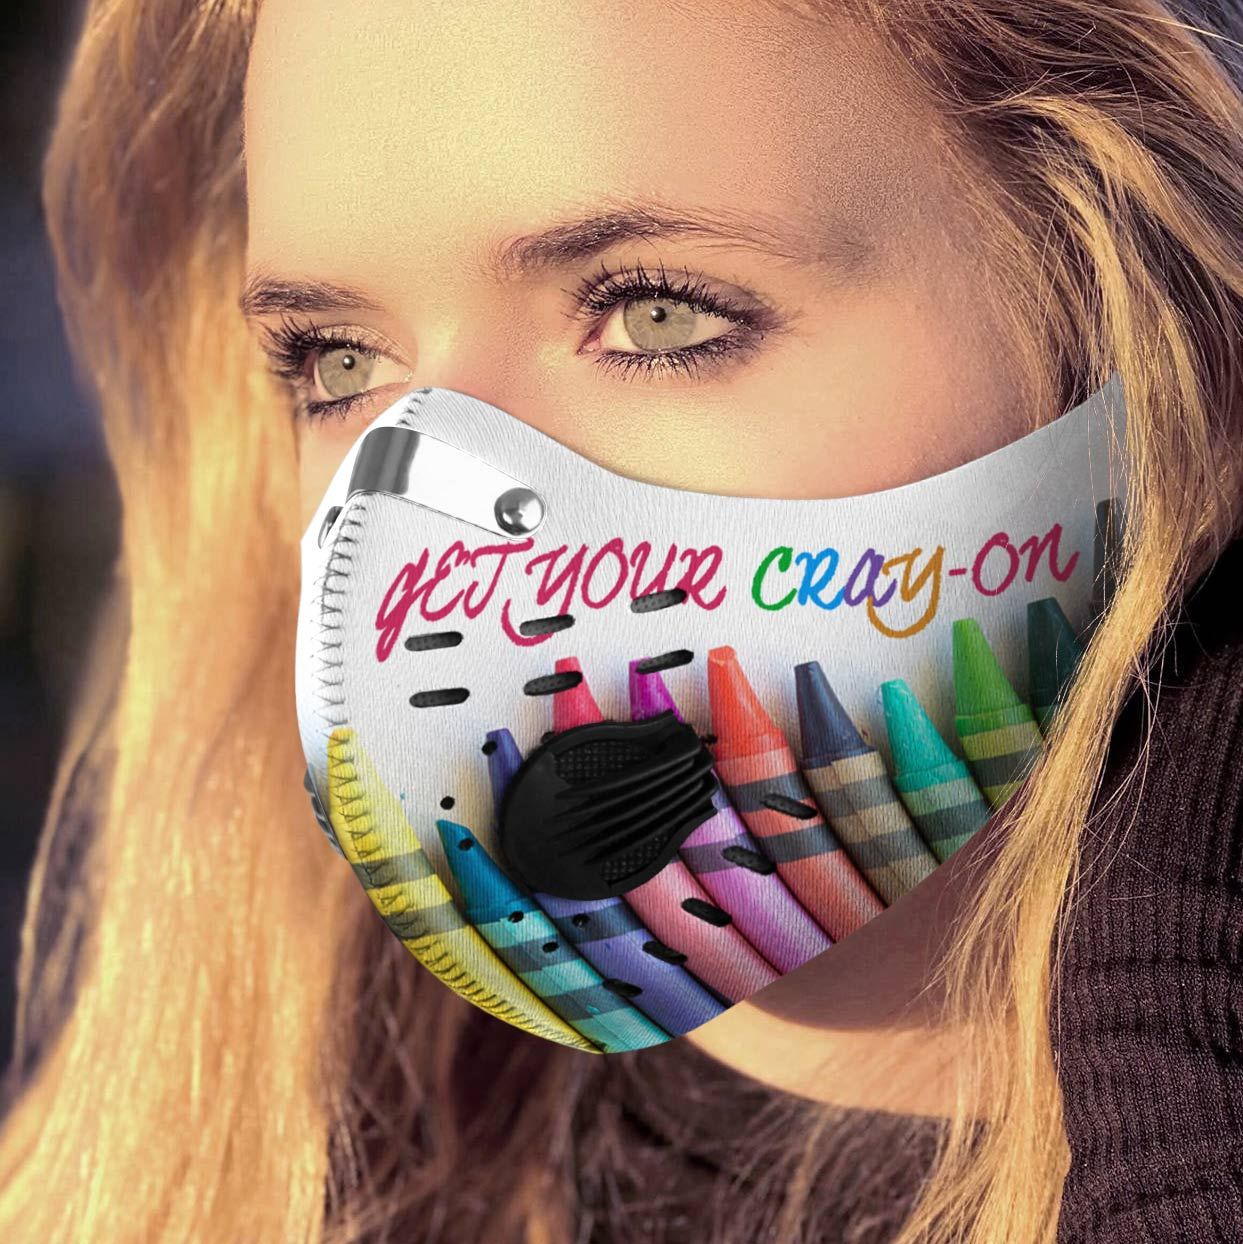 Get your cray-on carbon pm 2